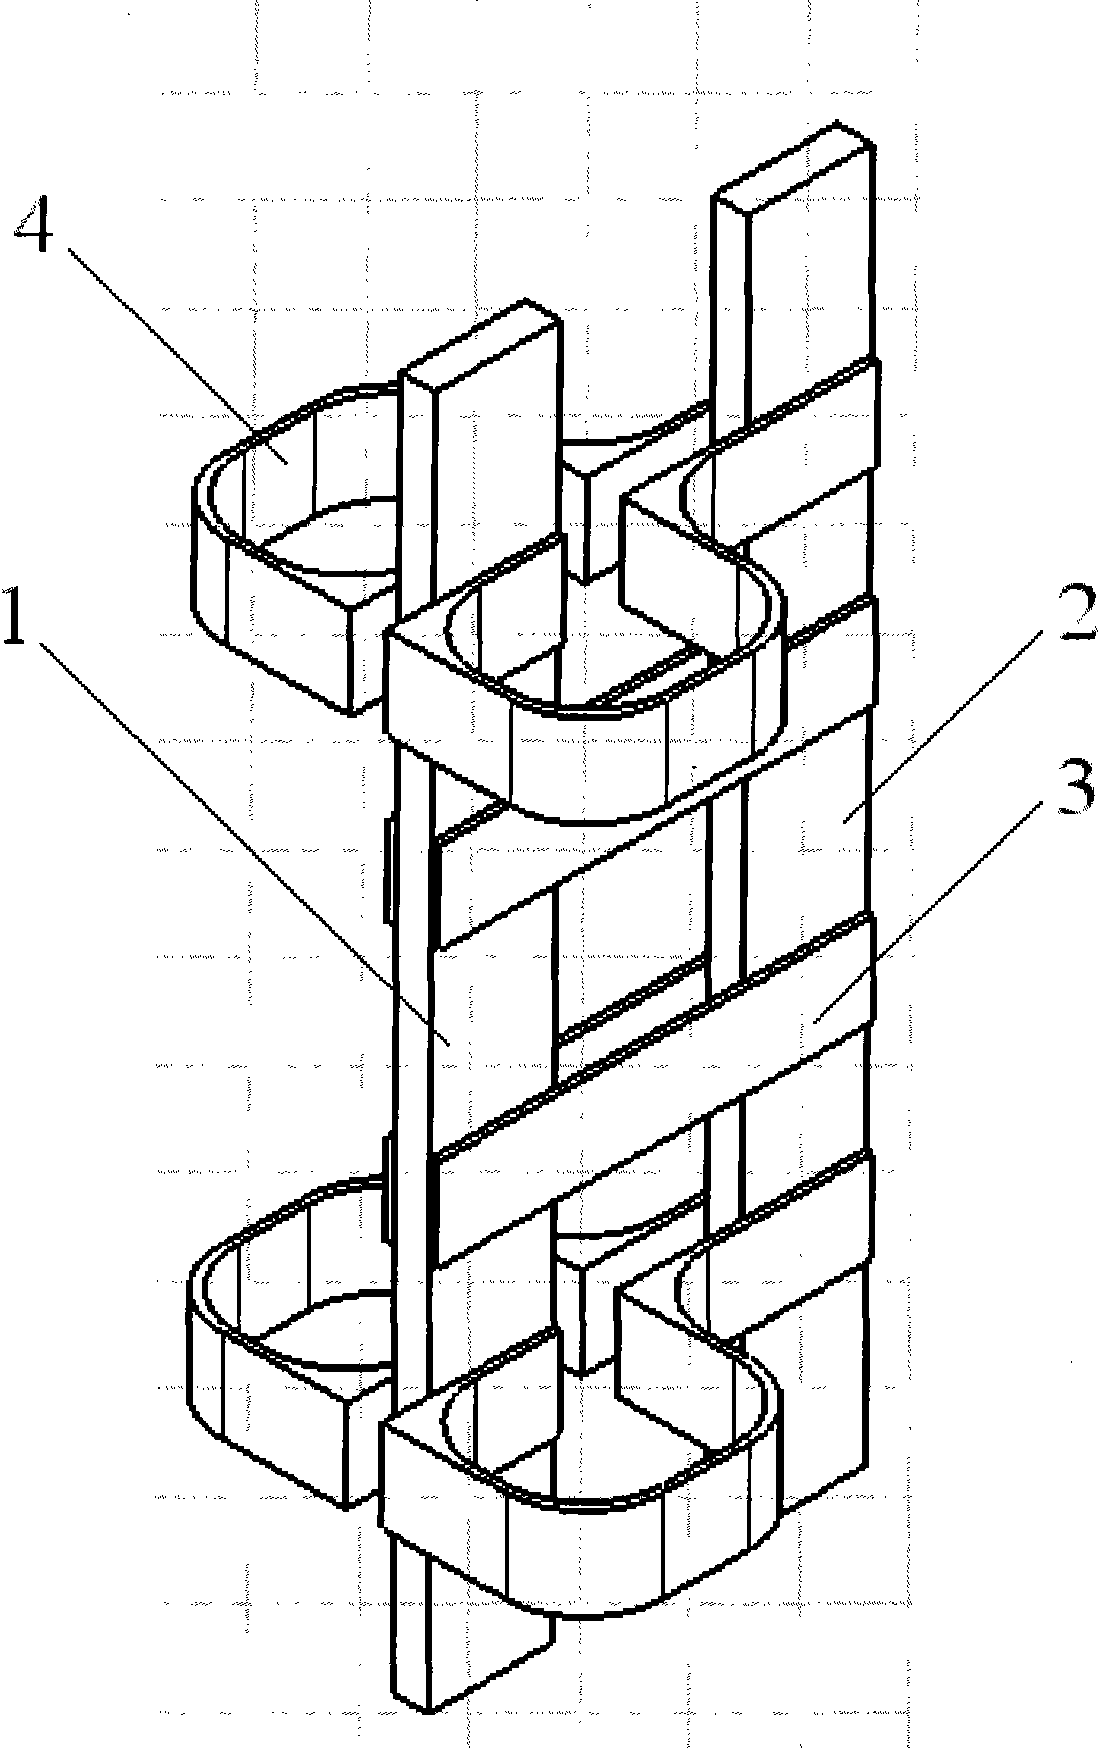 Current equalizing structure of high-current rectifier bridge arm